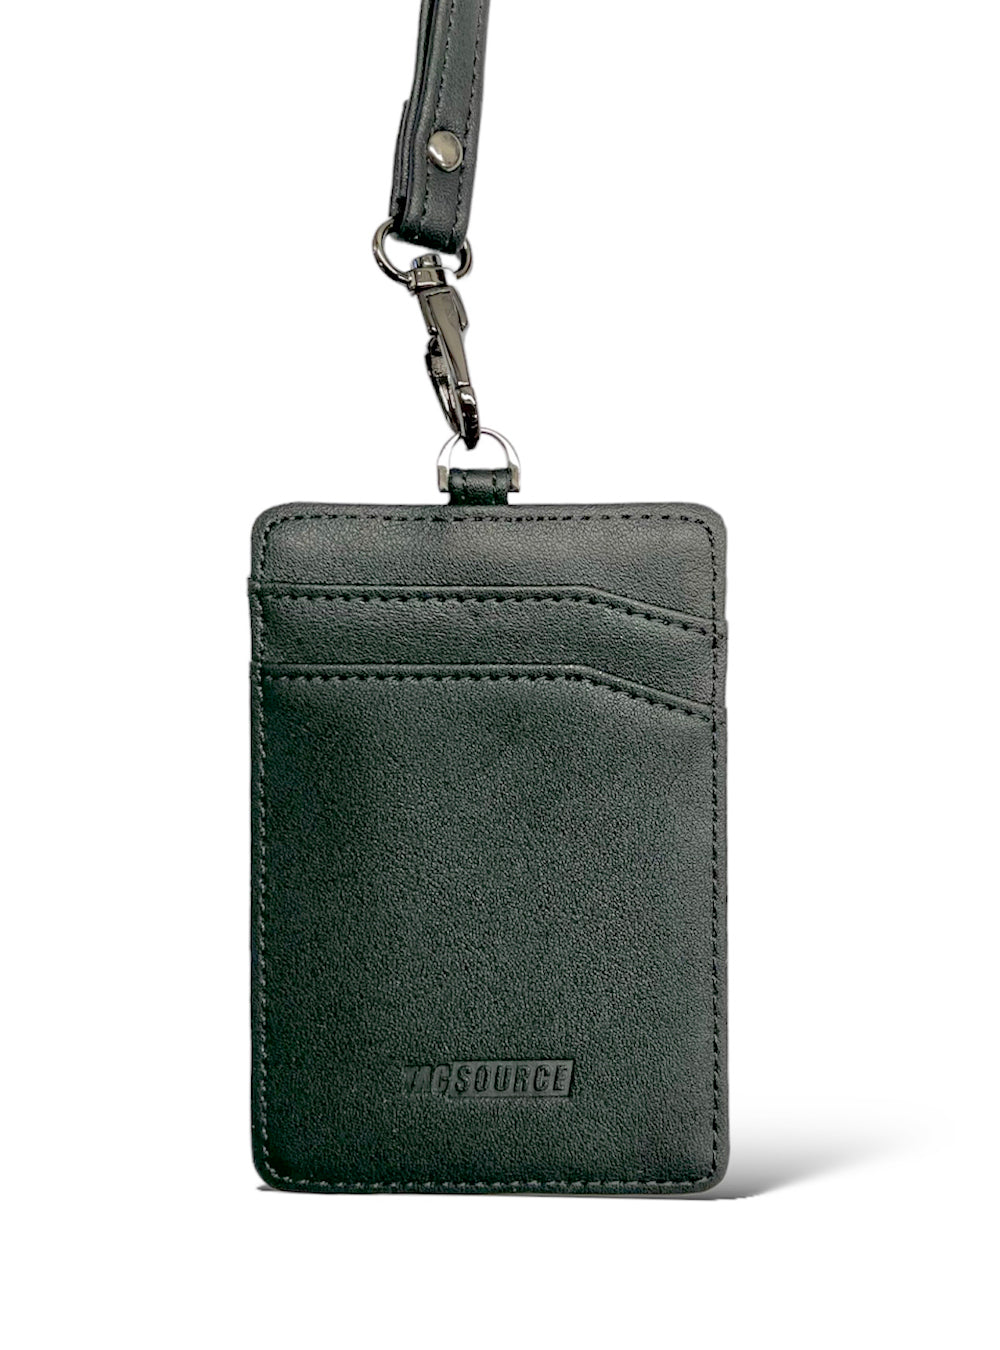 SALE - TacSource Recycled Leather ID Holder